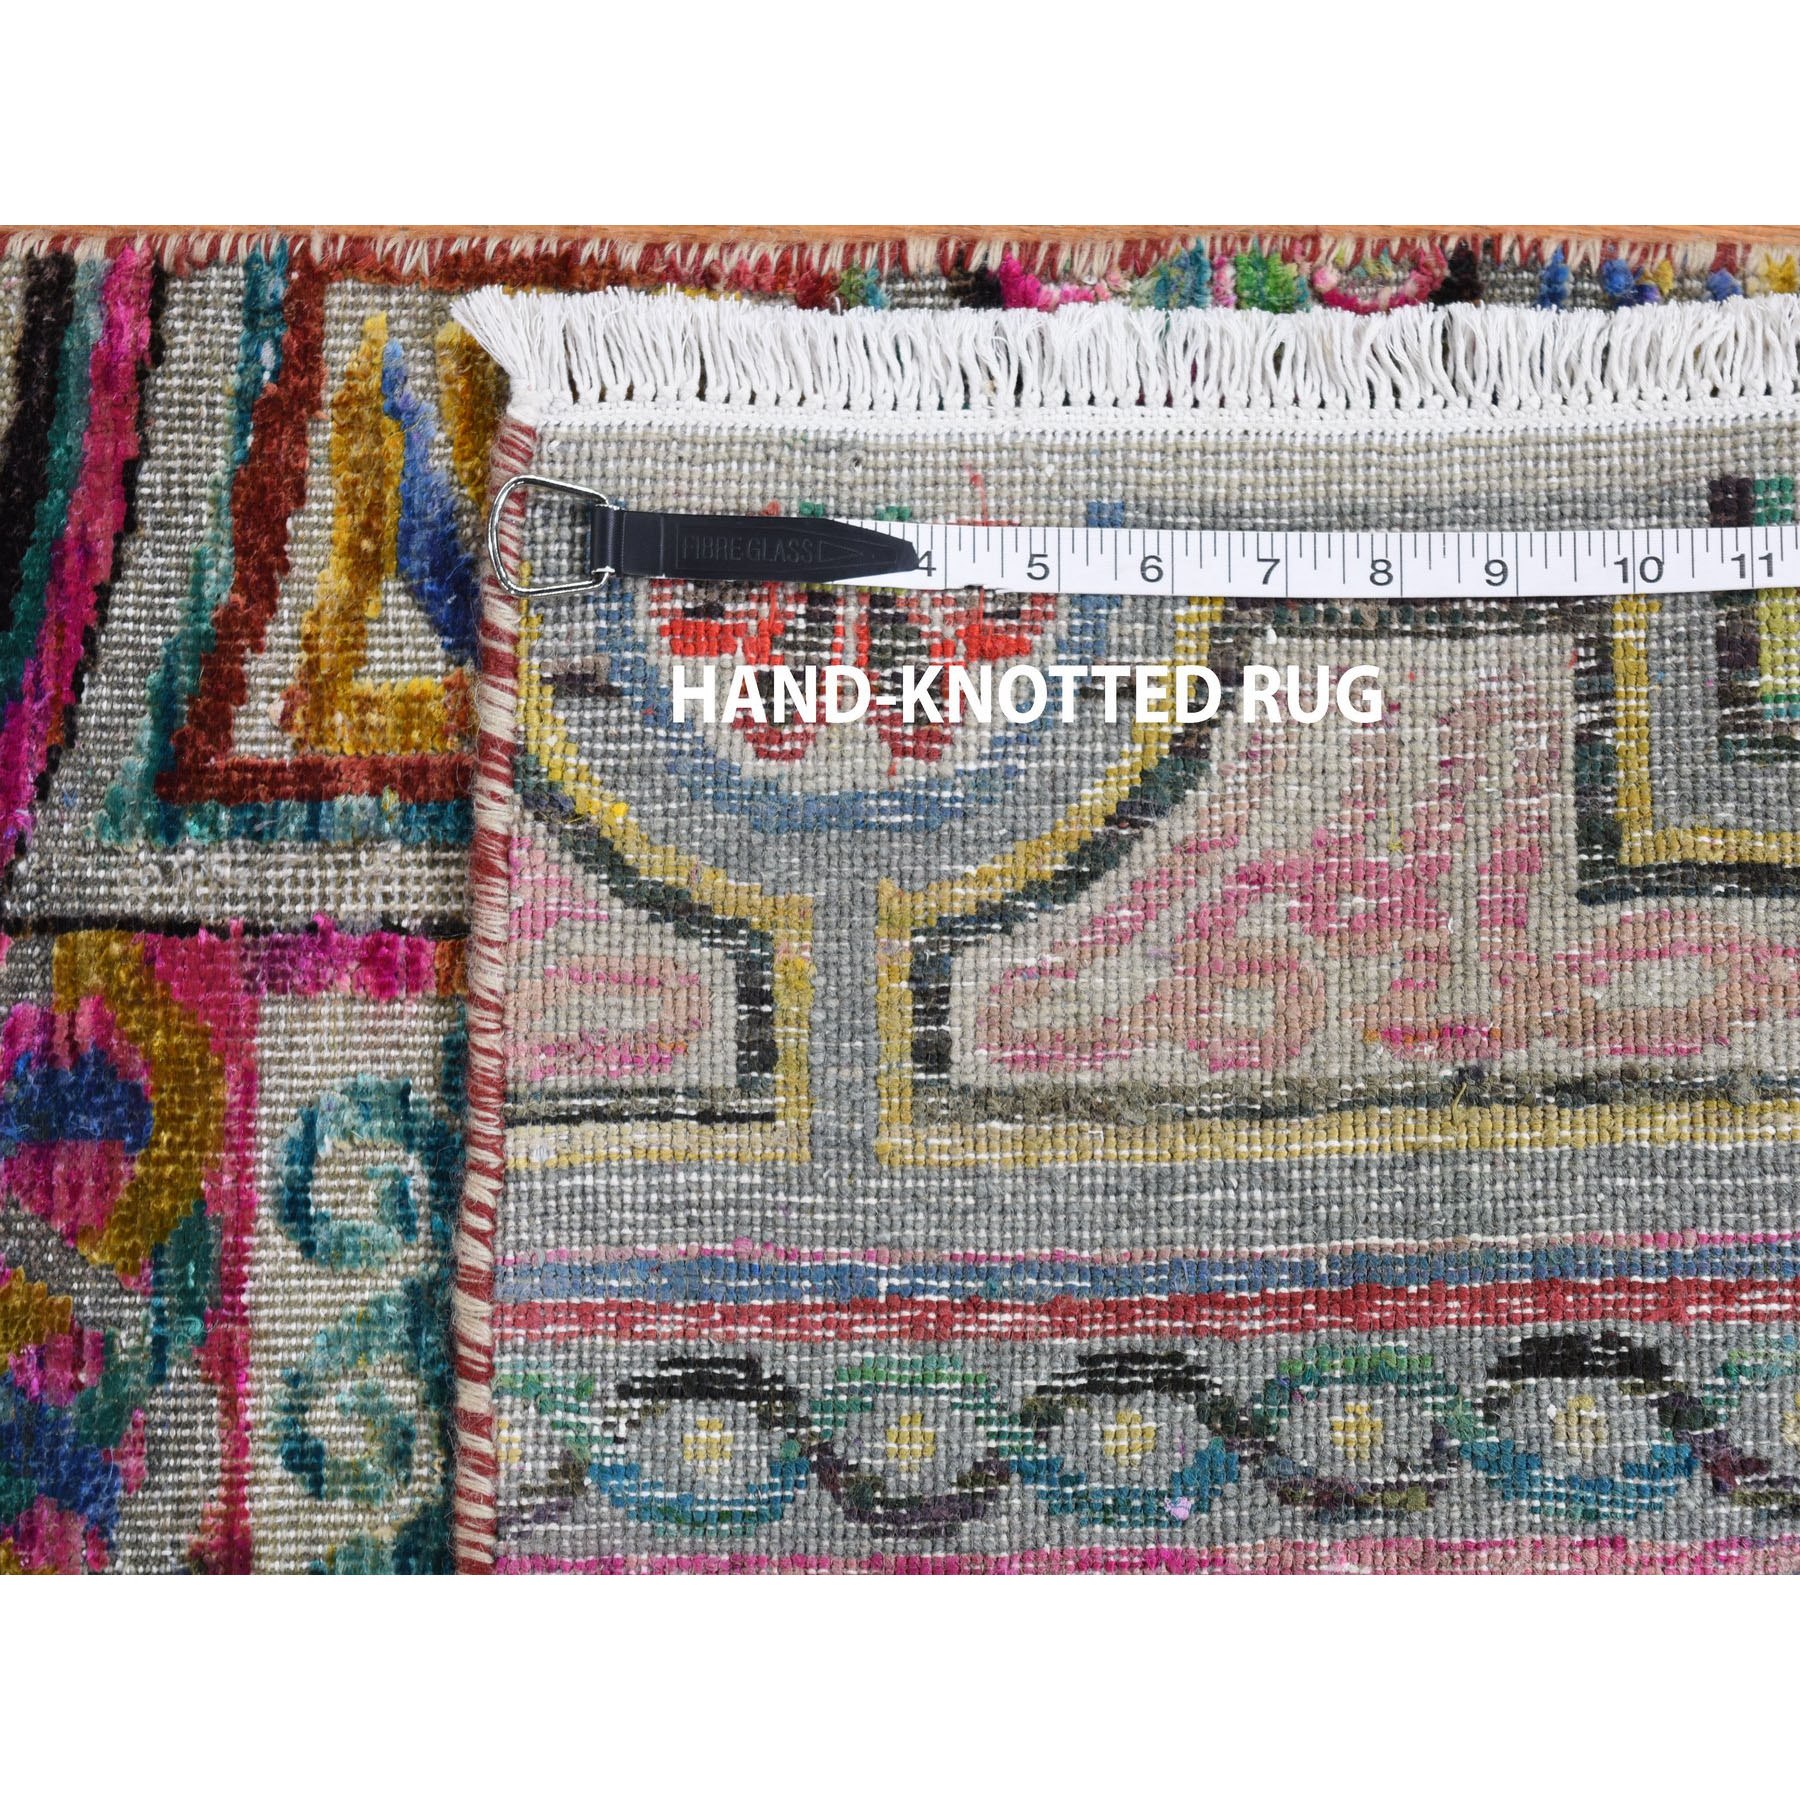 1-10 x3- Sampler Sari Silk With Textured Wool Arts And Crafts Hand-Knotted Oriental Rug 